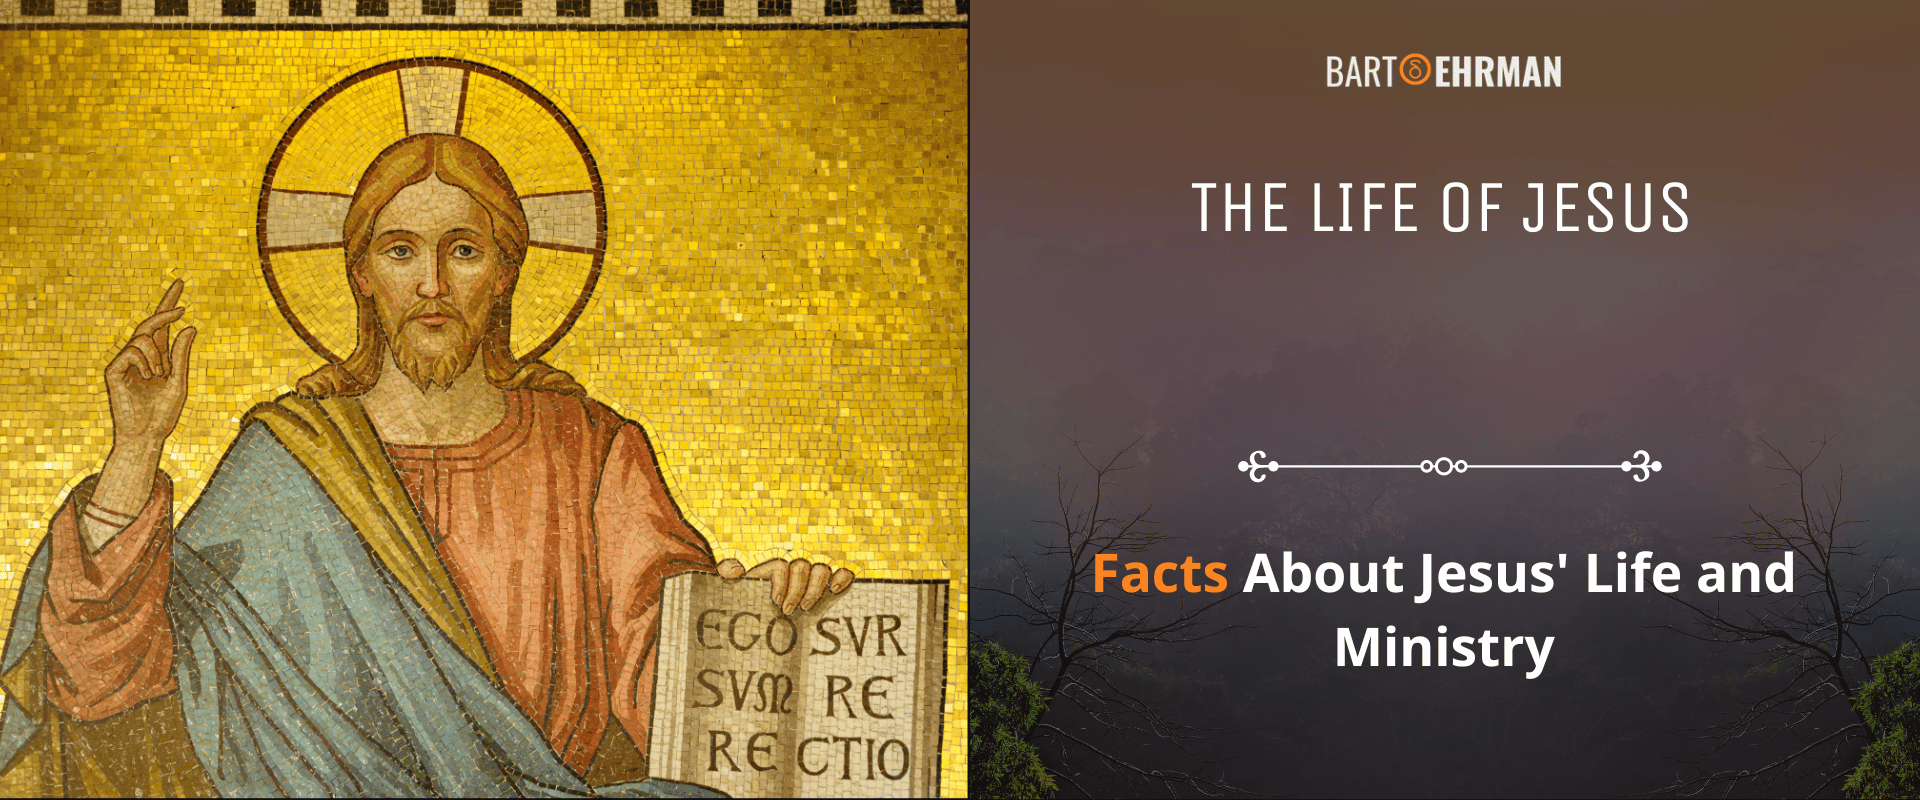 The Life of Jesus - Facts About Jesus Life and Ministry